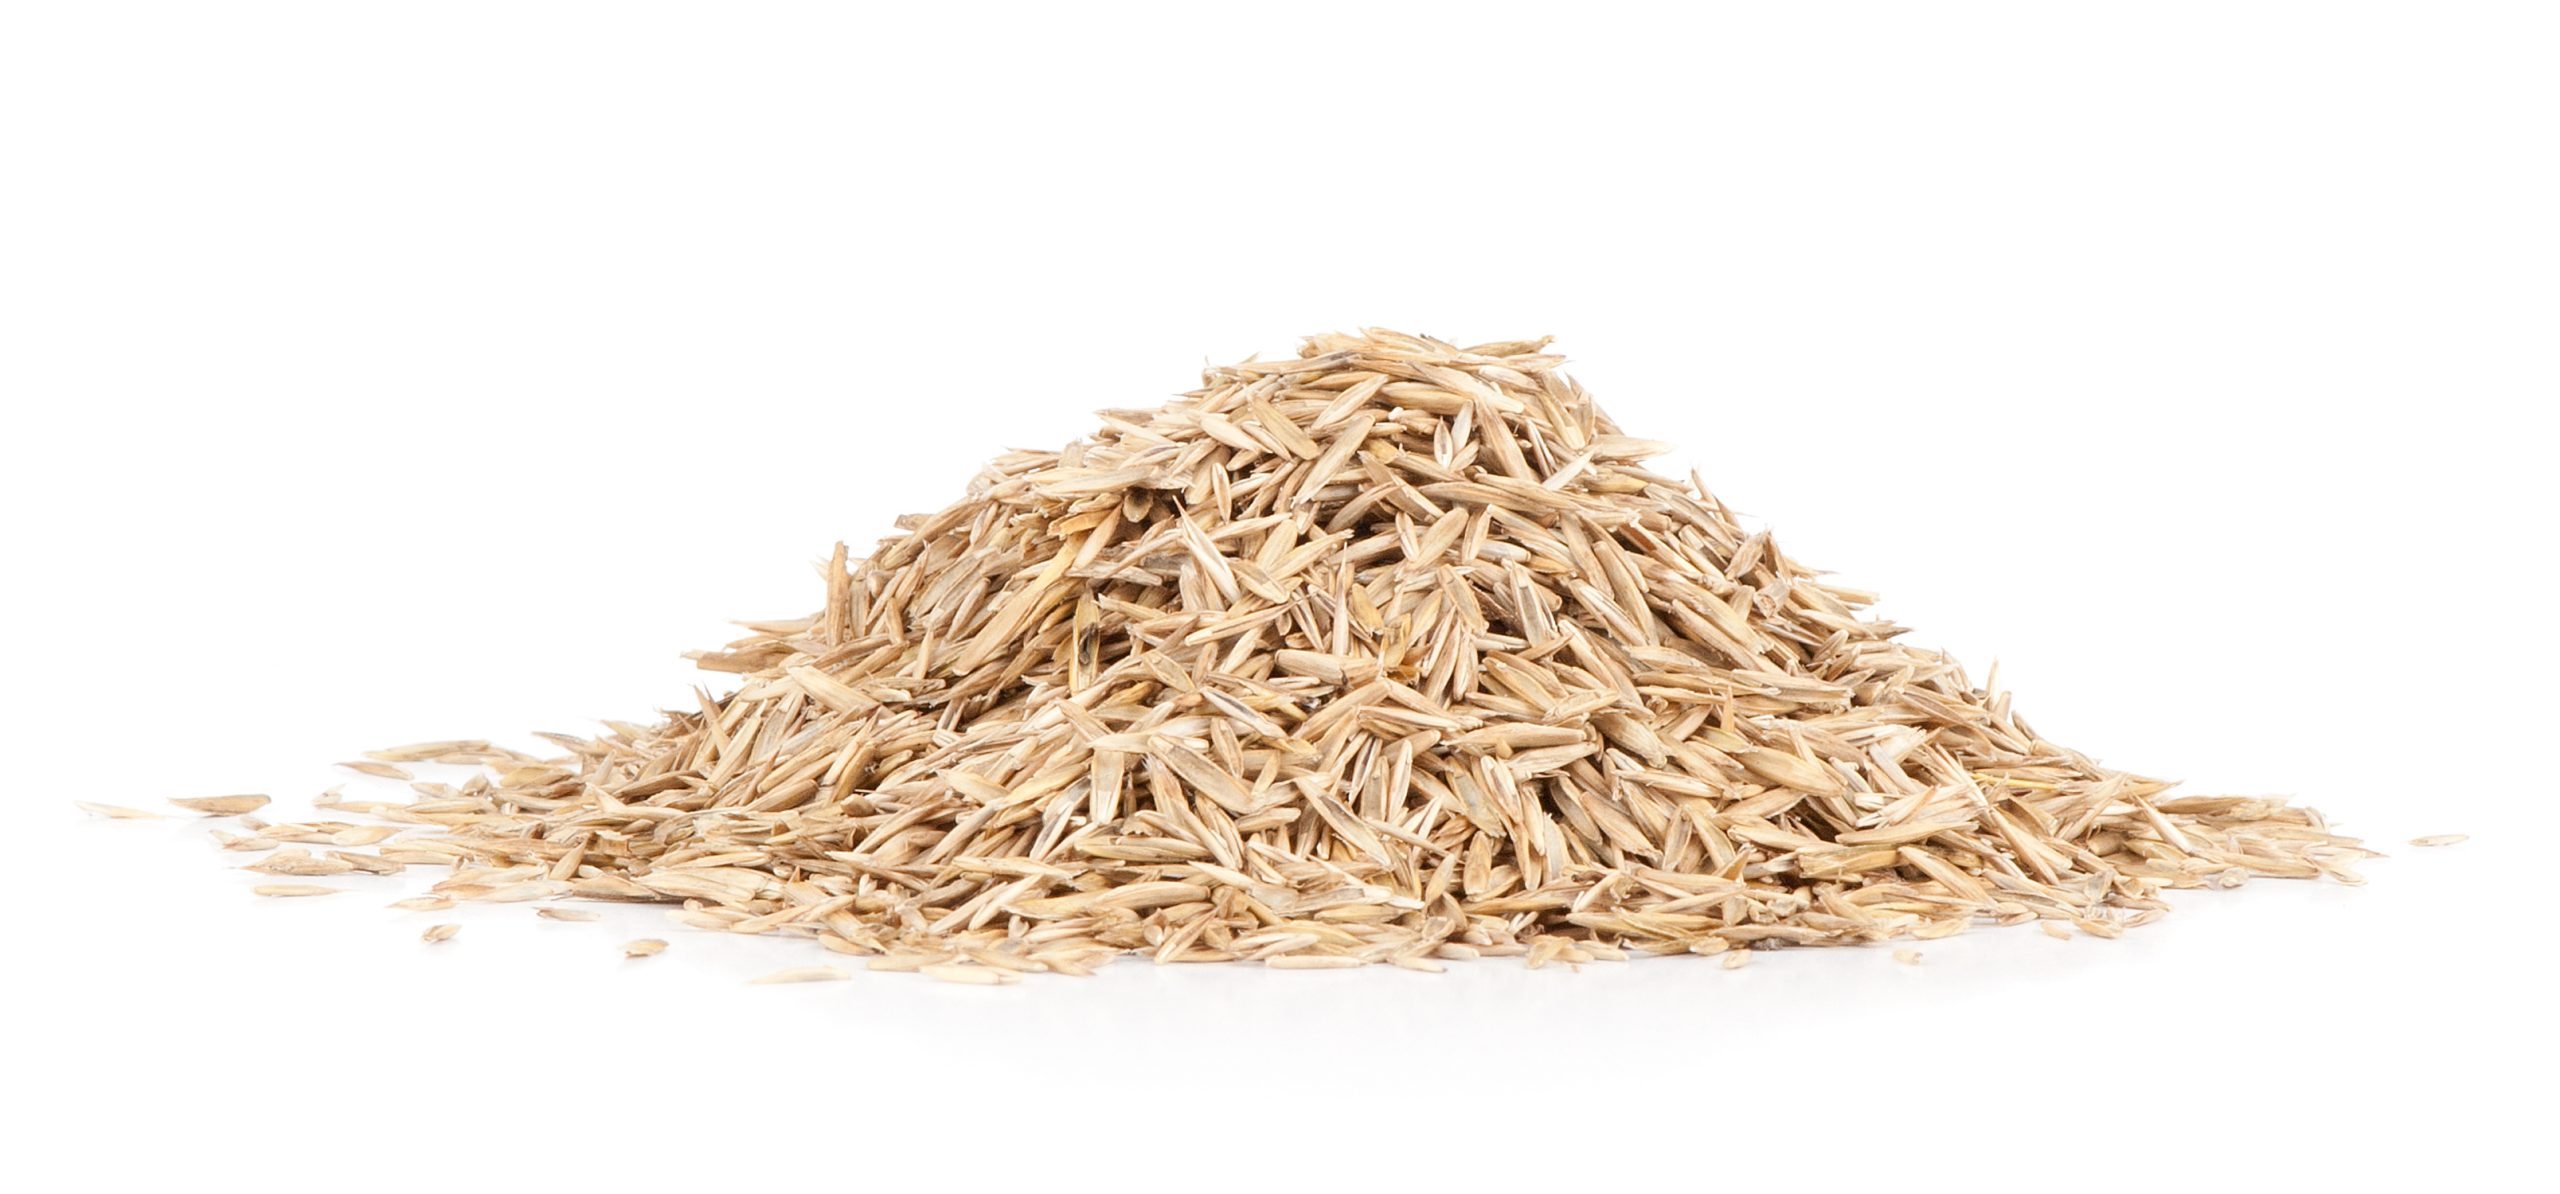 grass seed pile against white